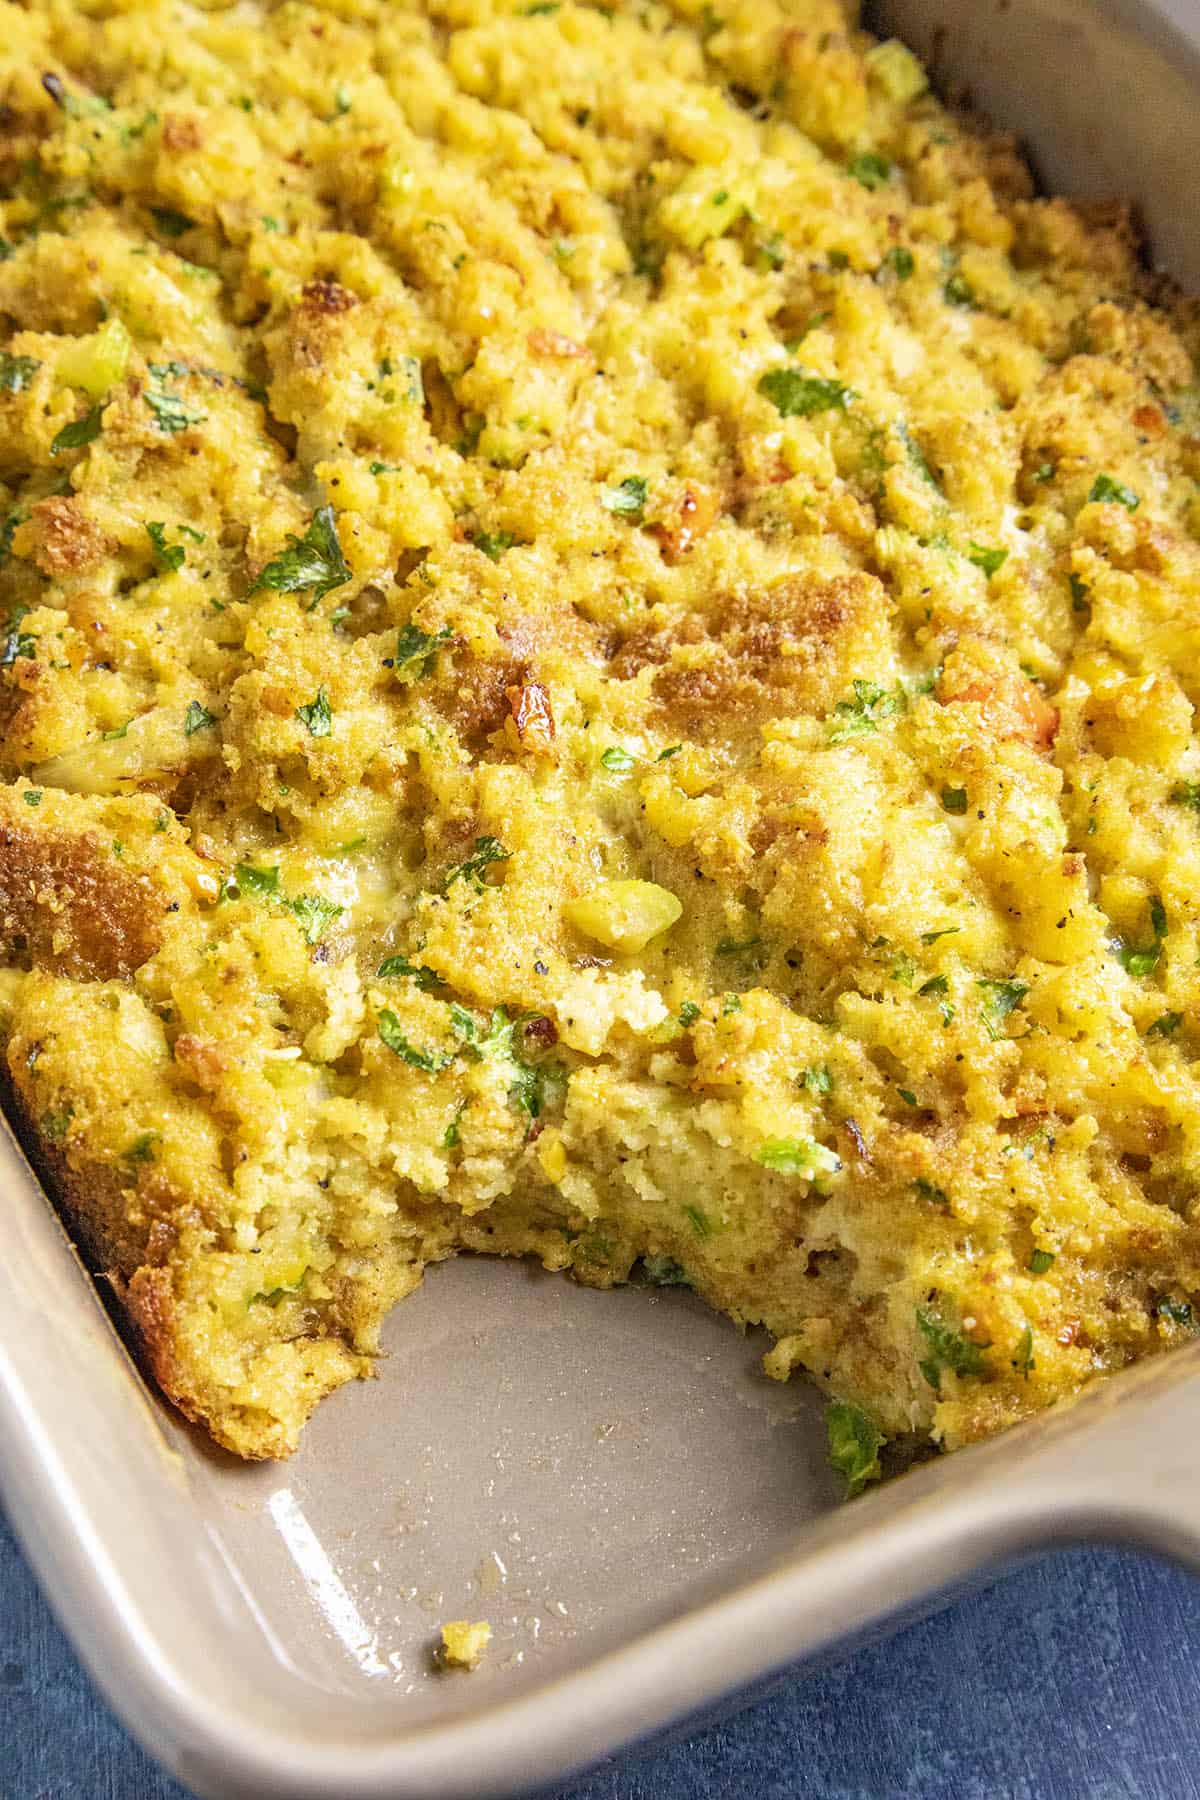 A scoop of Cornbread Dressing missing from the casserole dish